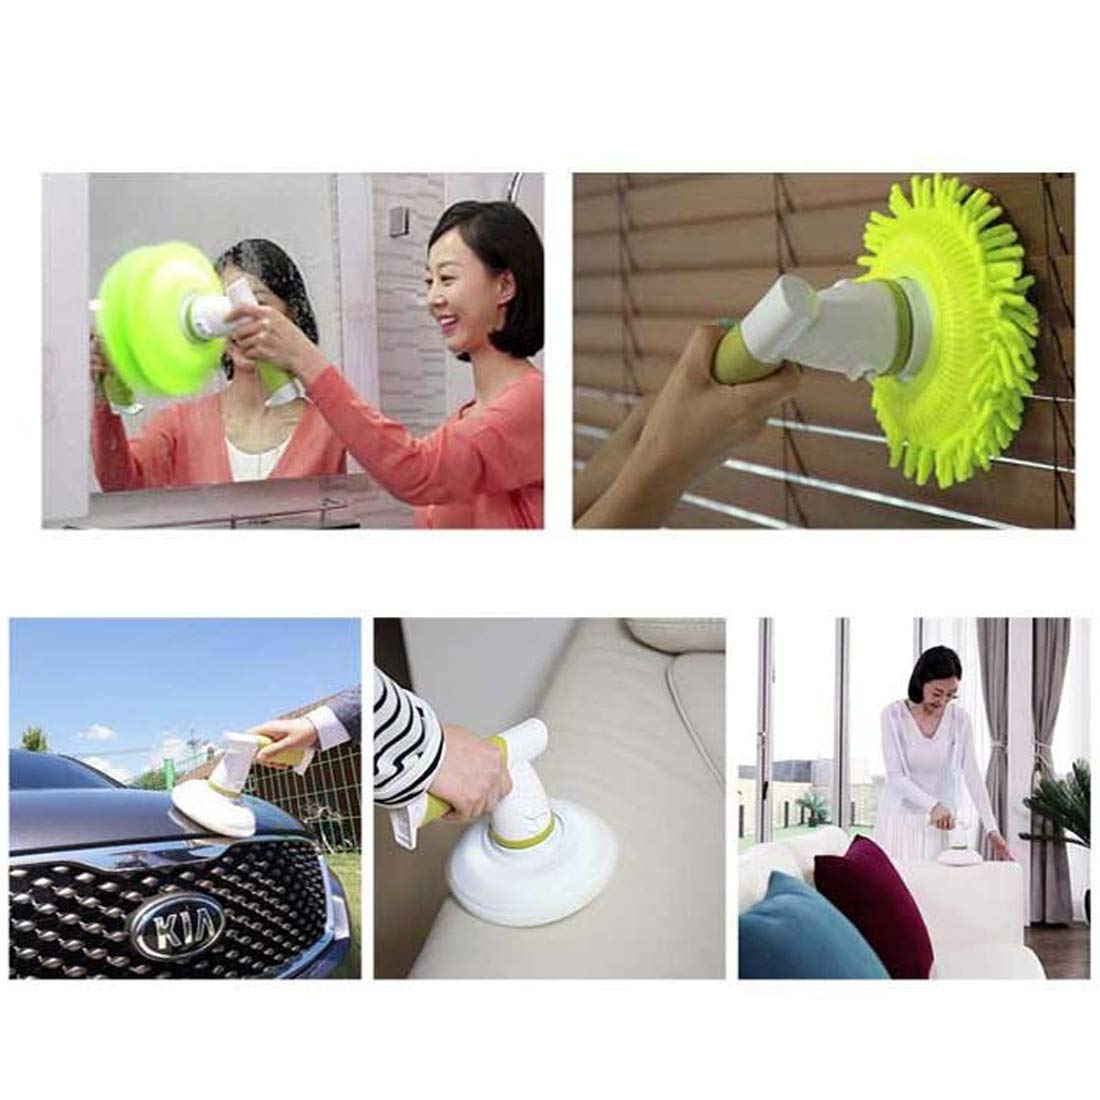  Electric Spin Scrubber,Electric Cleaning Brush with 3 Brush  Heads,Cordless Portable Scrub Brush,Handheld Shower Scrubber Suitable for  Bathroom/Tiles/Floor/Bathtub/Kitchen : Industrial & Scientific